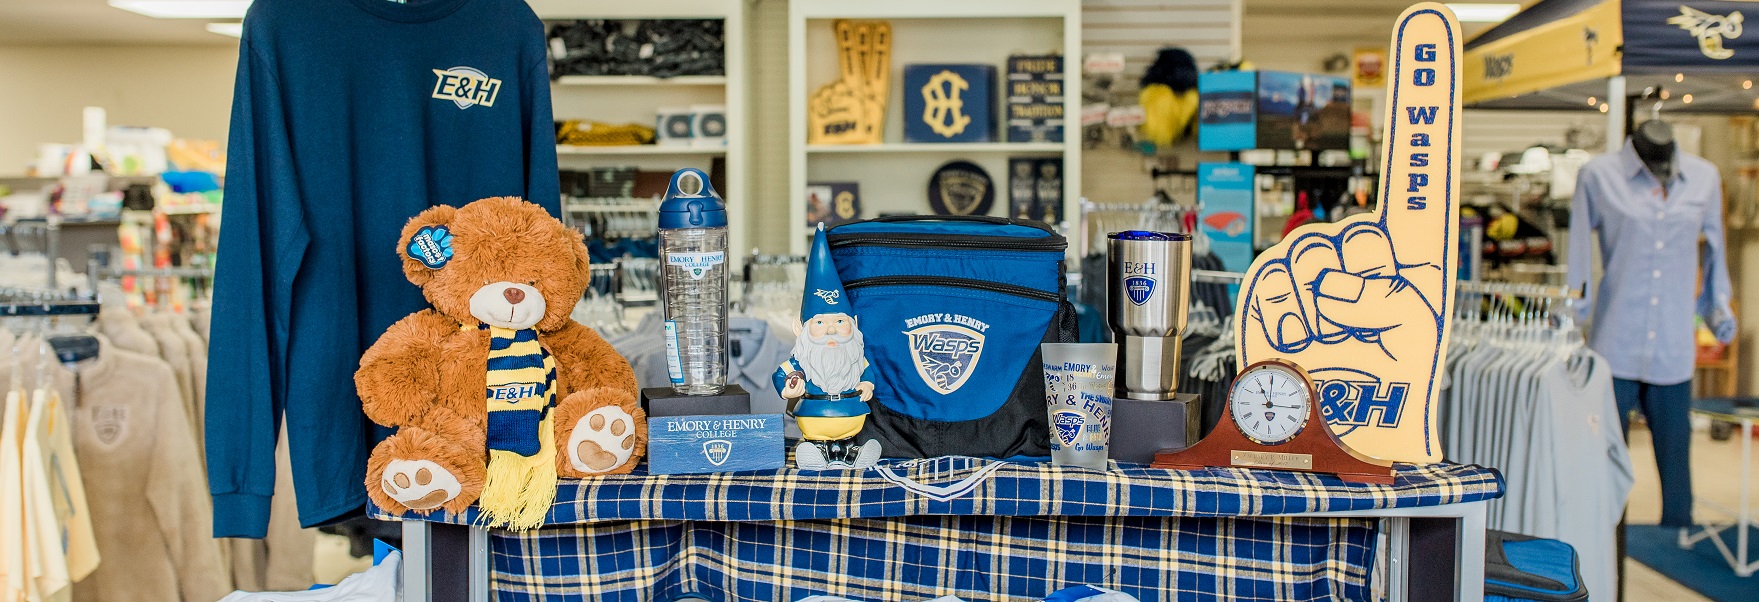 various merchandise for sale in the store including a teddy bear, a clock, a garden gnome,a cup, water bottle and travel mug, a cooler, a foam finger and a long sleeve blue t-shirt.